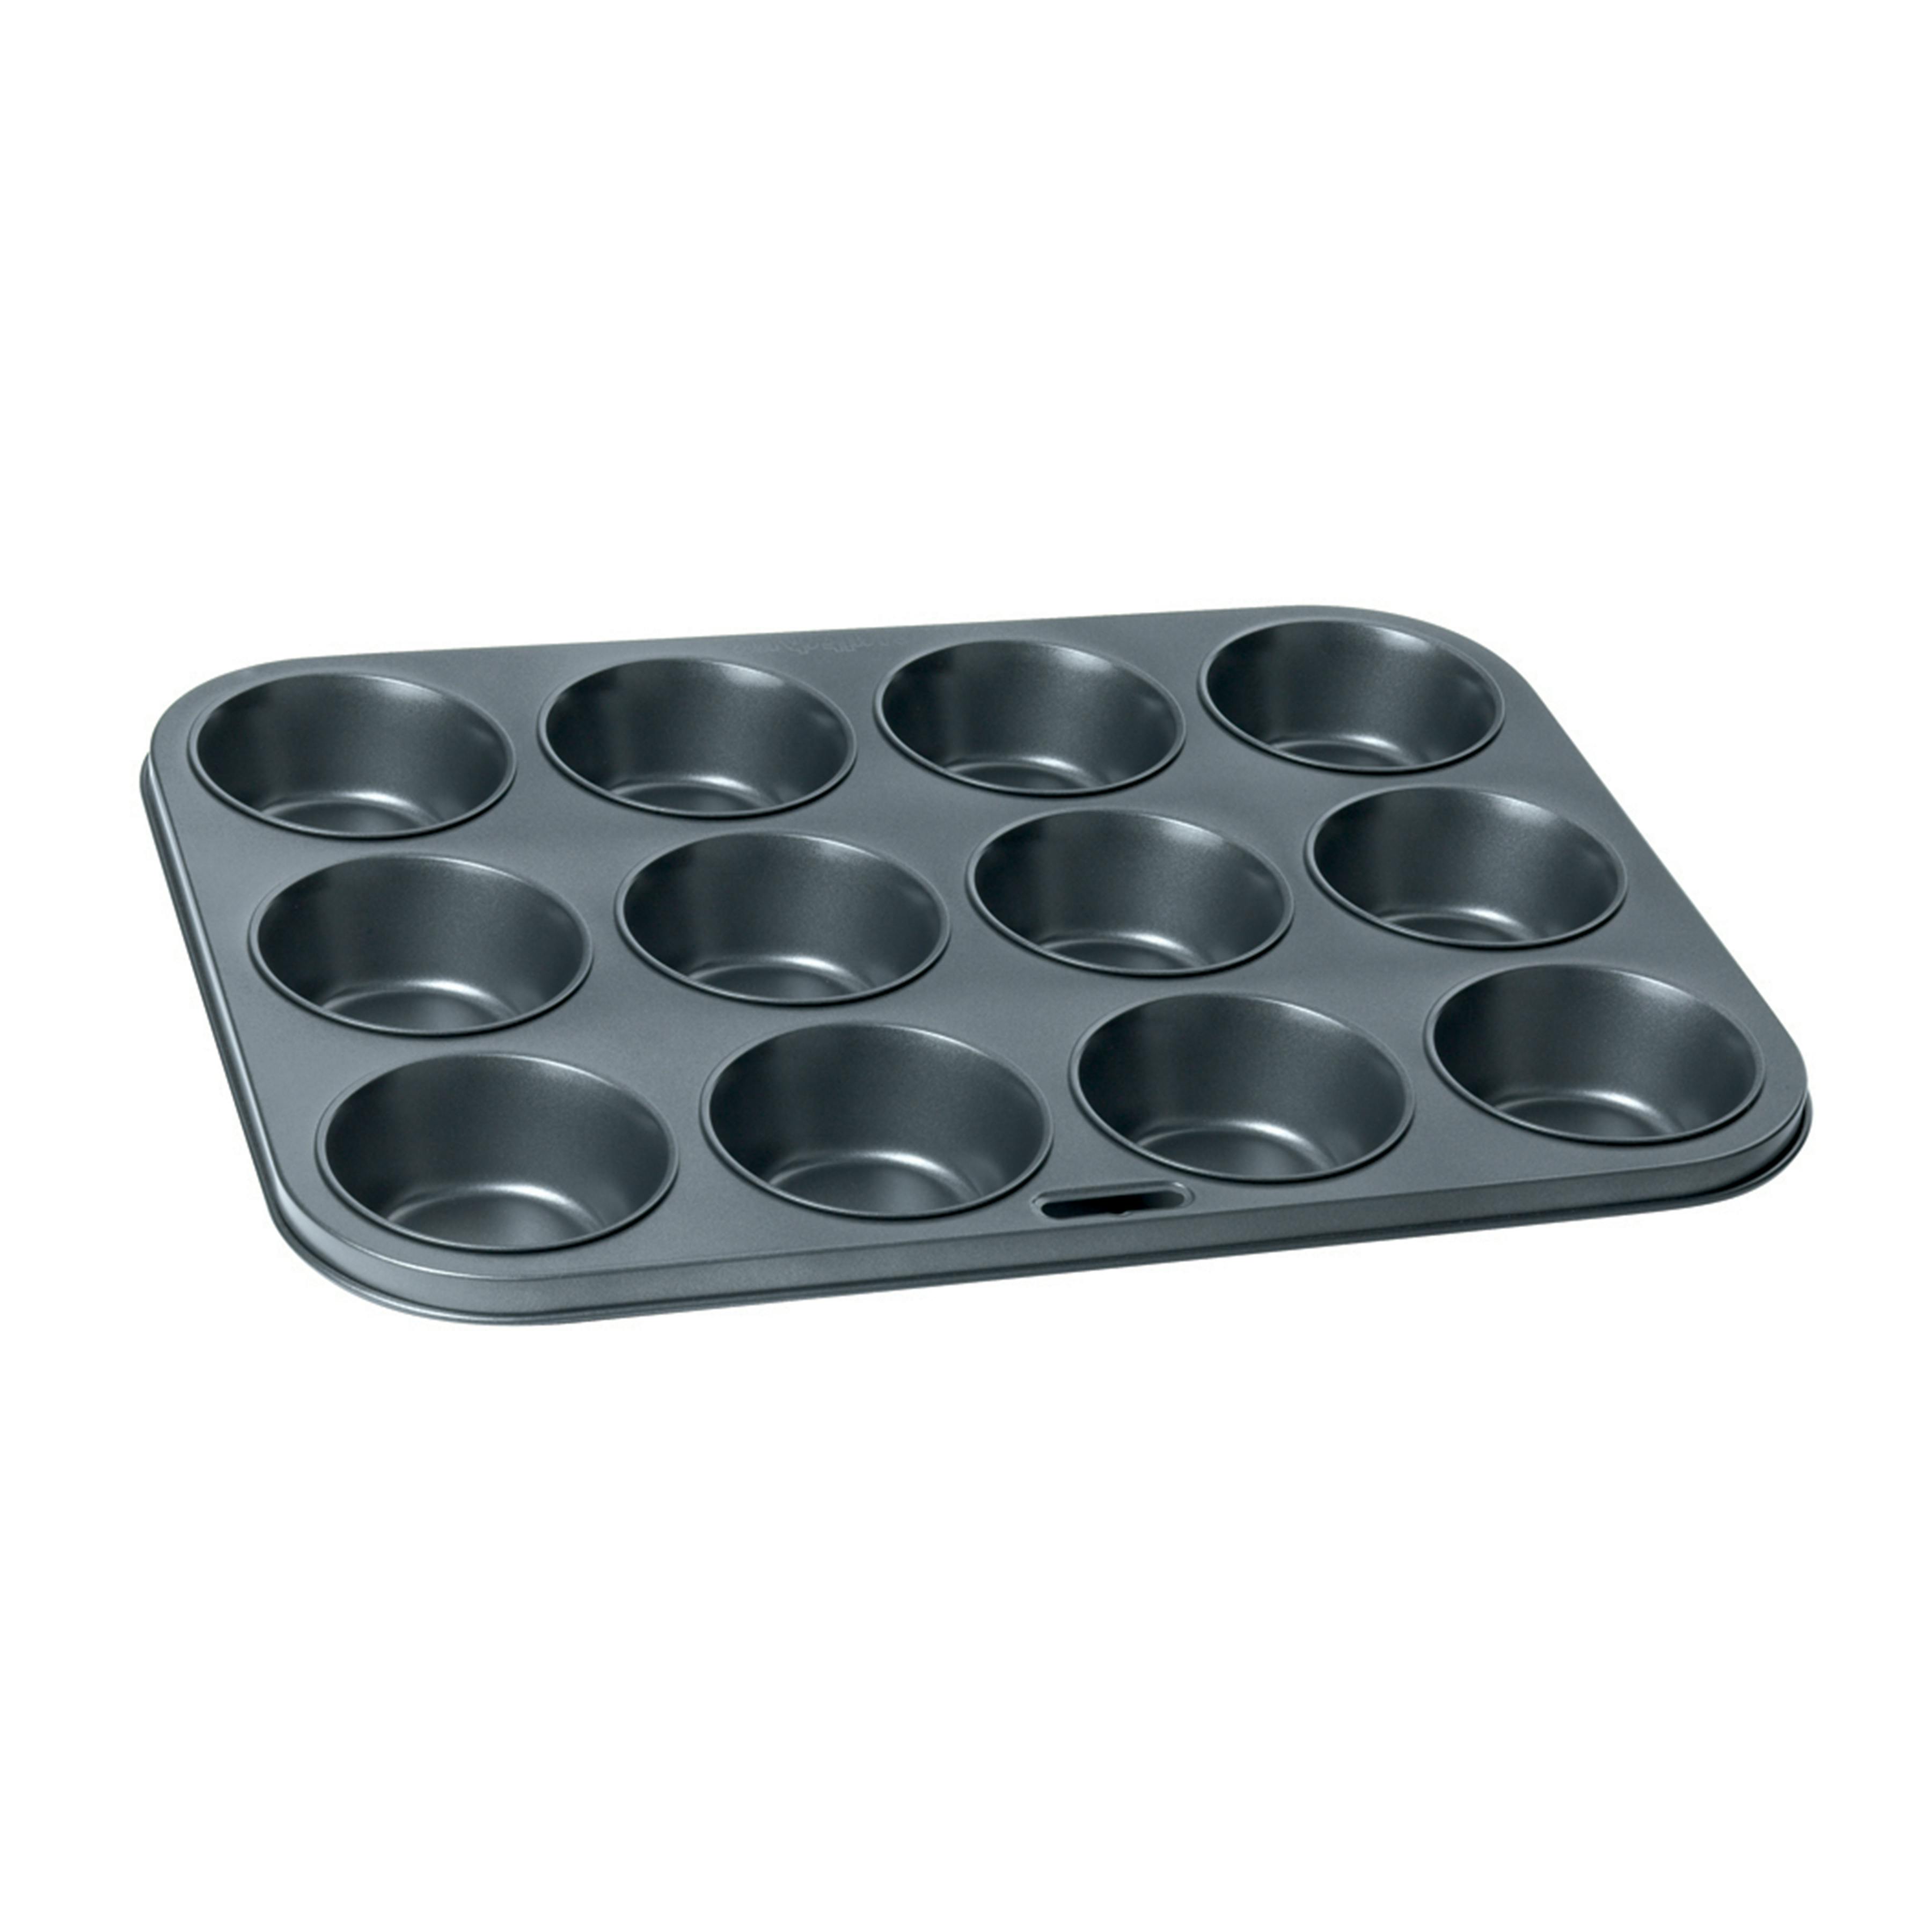 https://hipvan-images-production.imgix.net/product-images/26dc66f8-0f70-4adc-a527-c52ff6247a83/Wiltshire--Wiltshire-Easybake-Muffin-Pan-(2-Sizes)-2.png?auto=format%2Ccompress&fm=jpg&cs=srgb&ar=1%3A1&fit=fill&bg=ffffff&ixlib=react-9.5.4